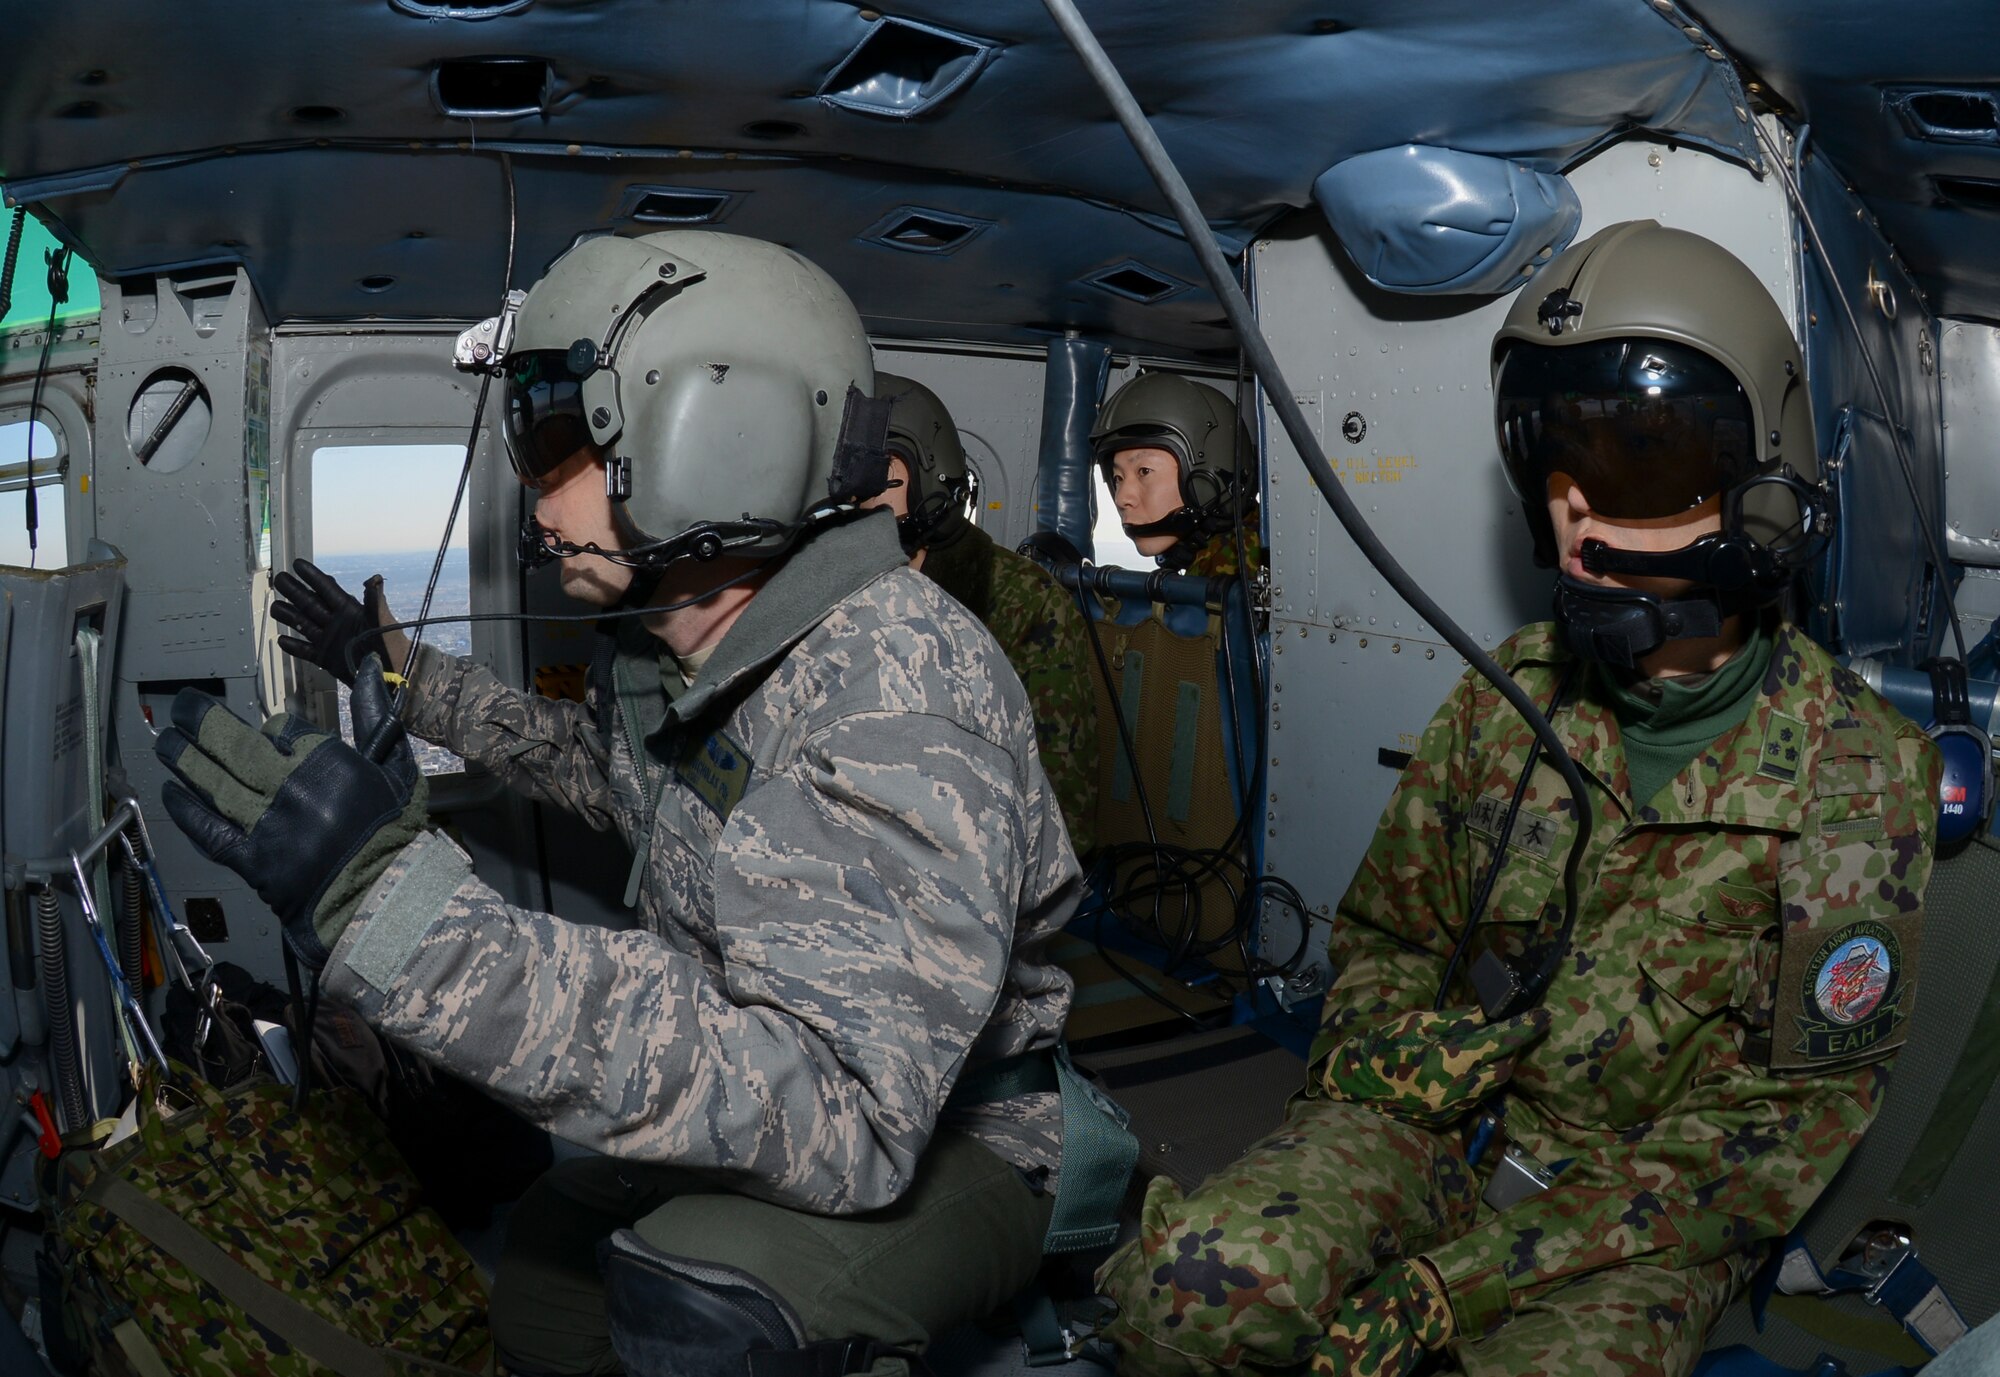 Members of the Japan Ground Self-Defense Force (JGSDF) ride along with U.S. service members as they perform formation maneuvers during a bilateral training mission Jan. 29, 2015, near Tokyo. U.S. and JGSDF members conducted the exchange mission to deepen their understanding of each other’s tactics, techniques and procedures. (U.S. Air Force photo/Senior Airman Michael Washburn)